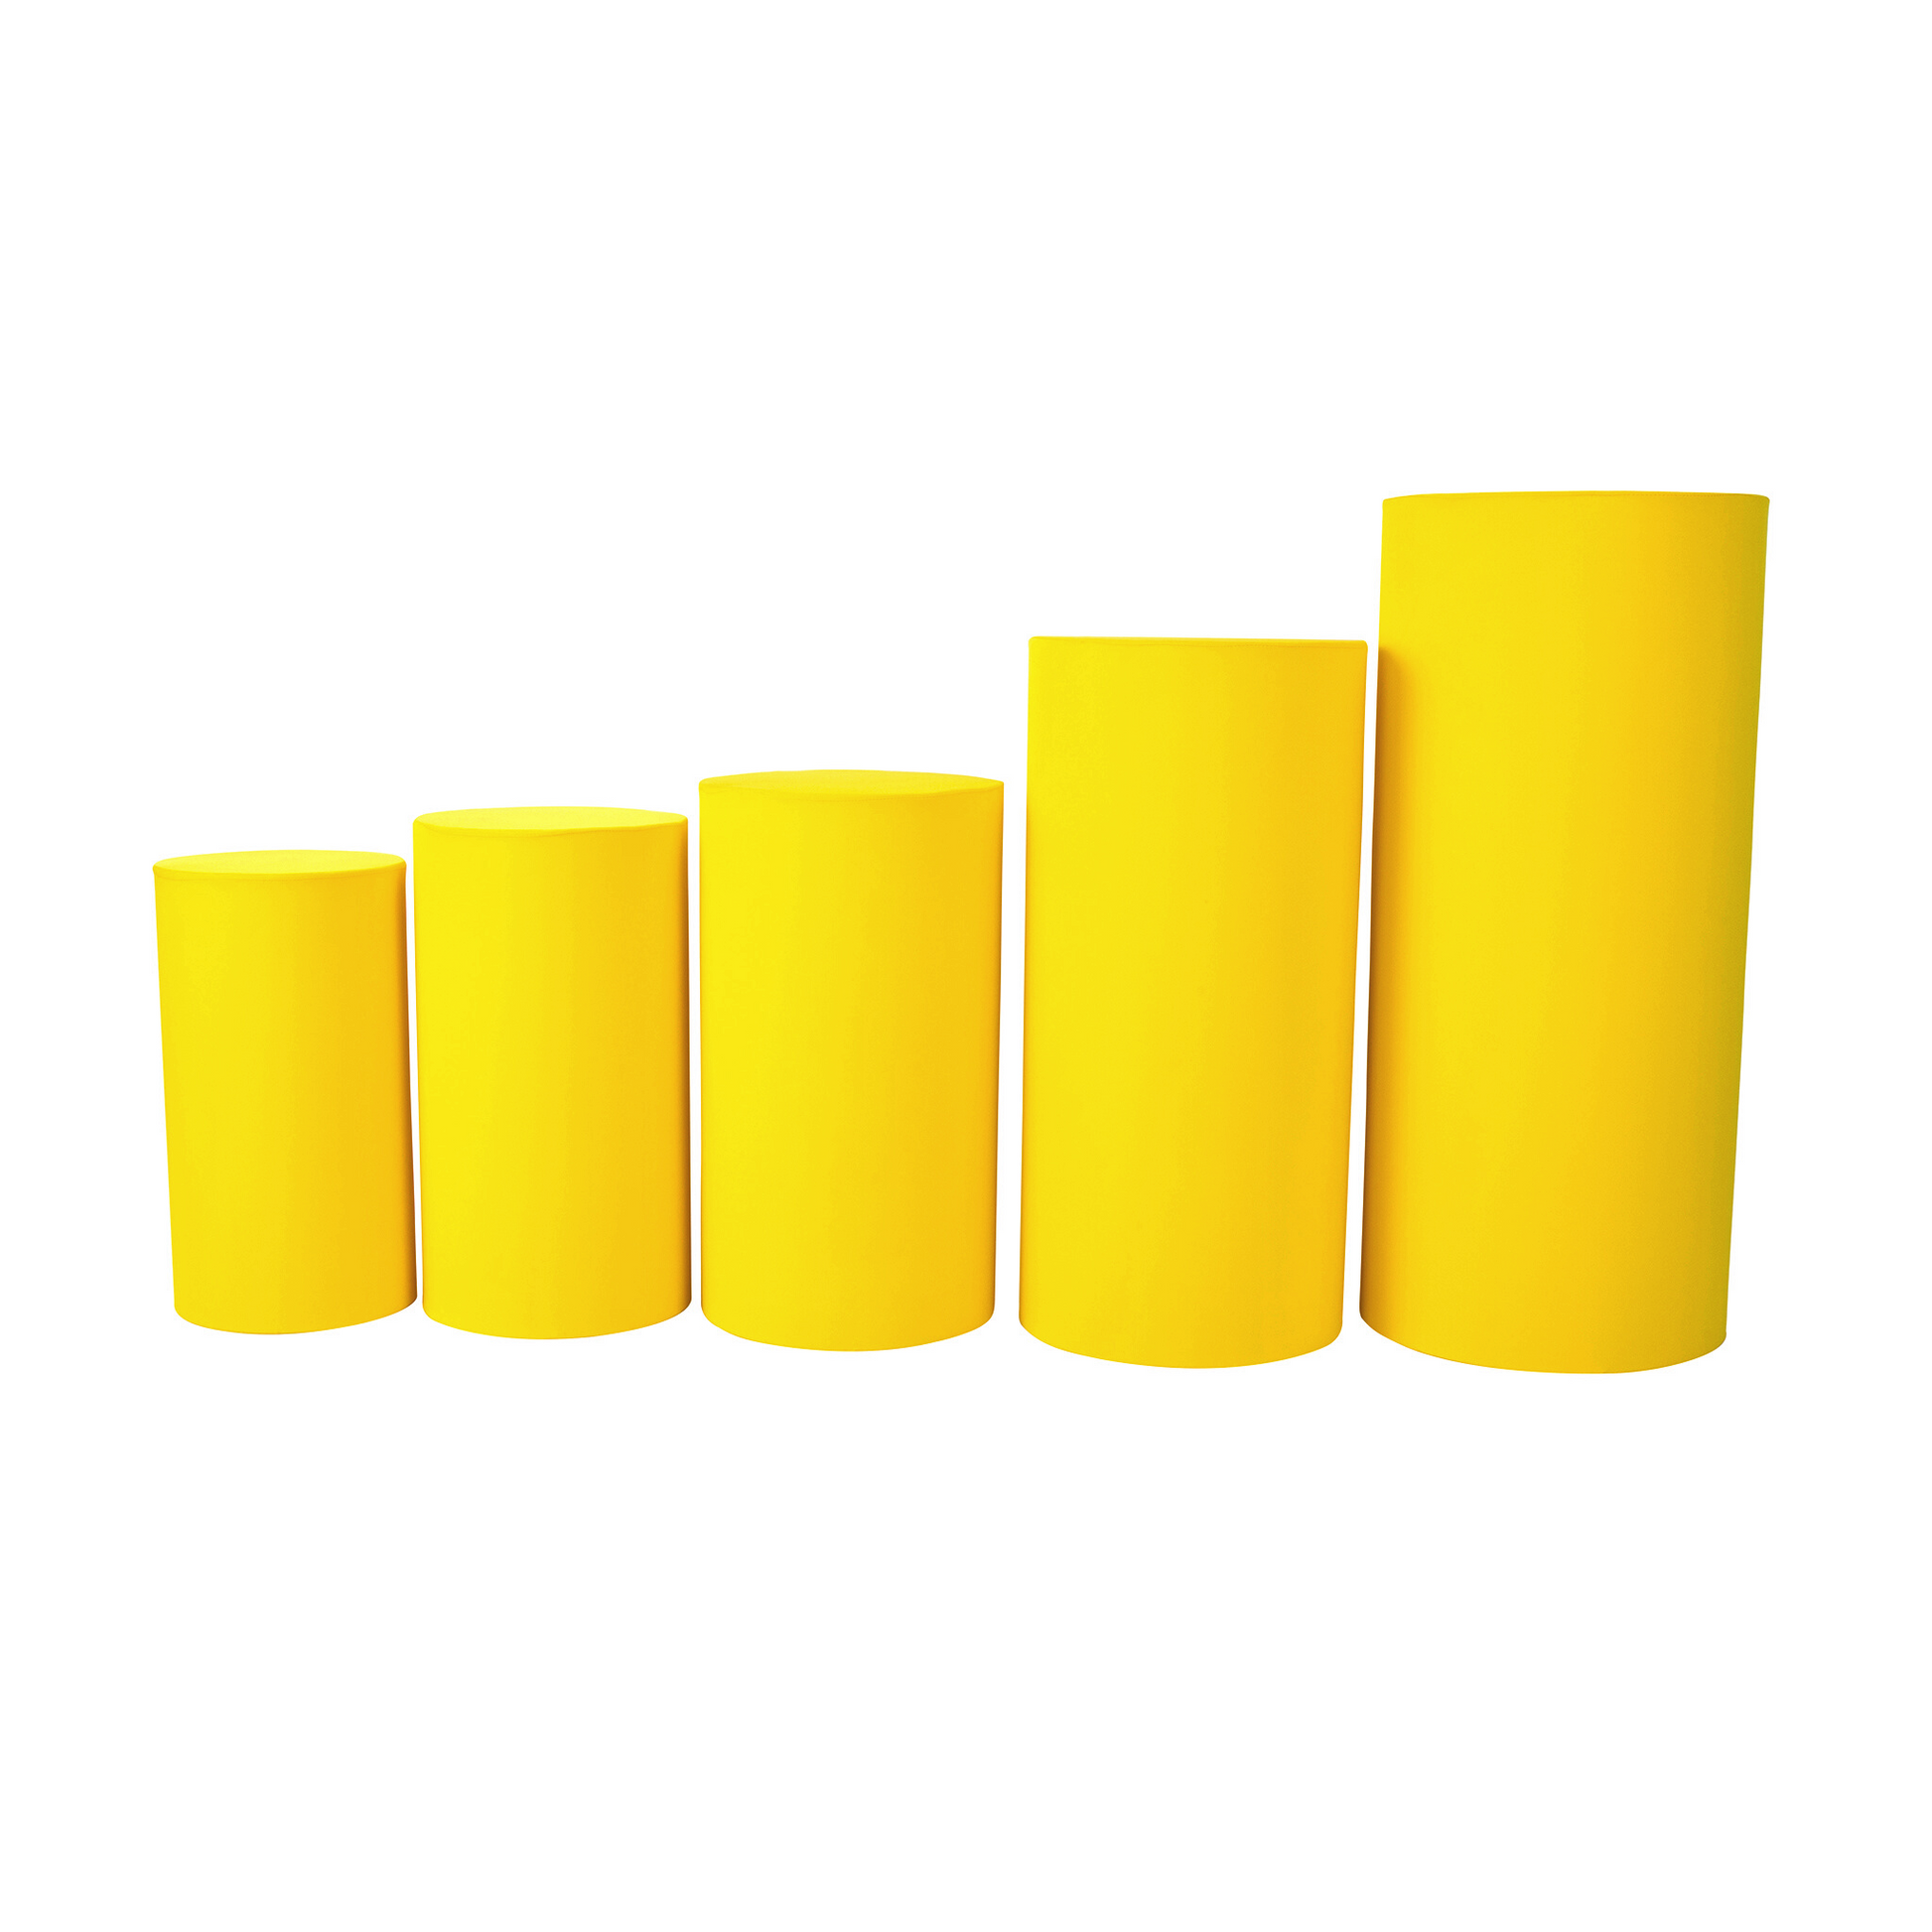 Spandex Pillar Covers for Metal Cylinder Pedestal Stands 5 pcs/set - Canary Yellow